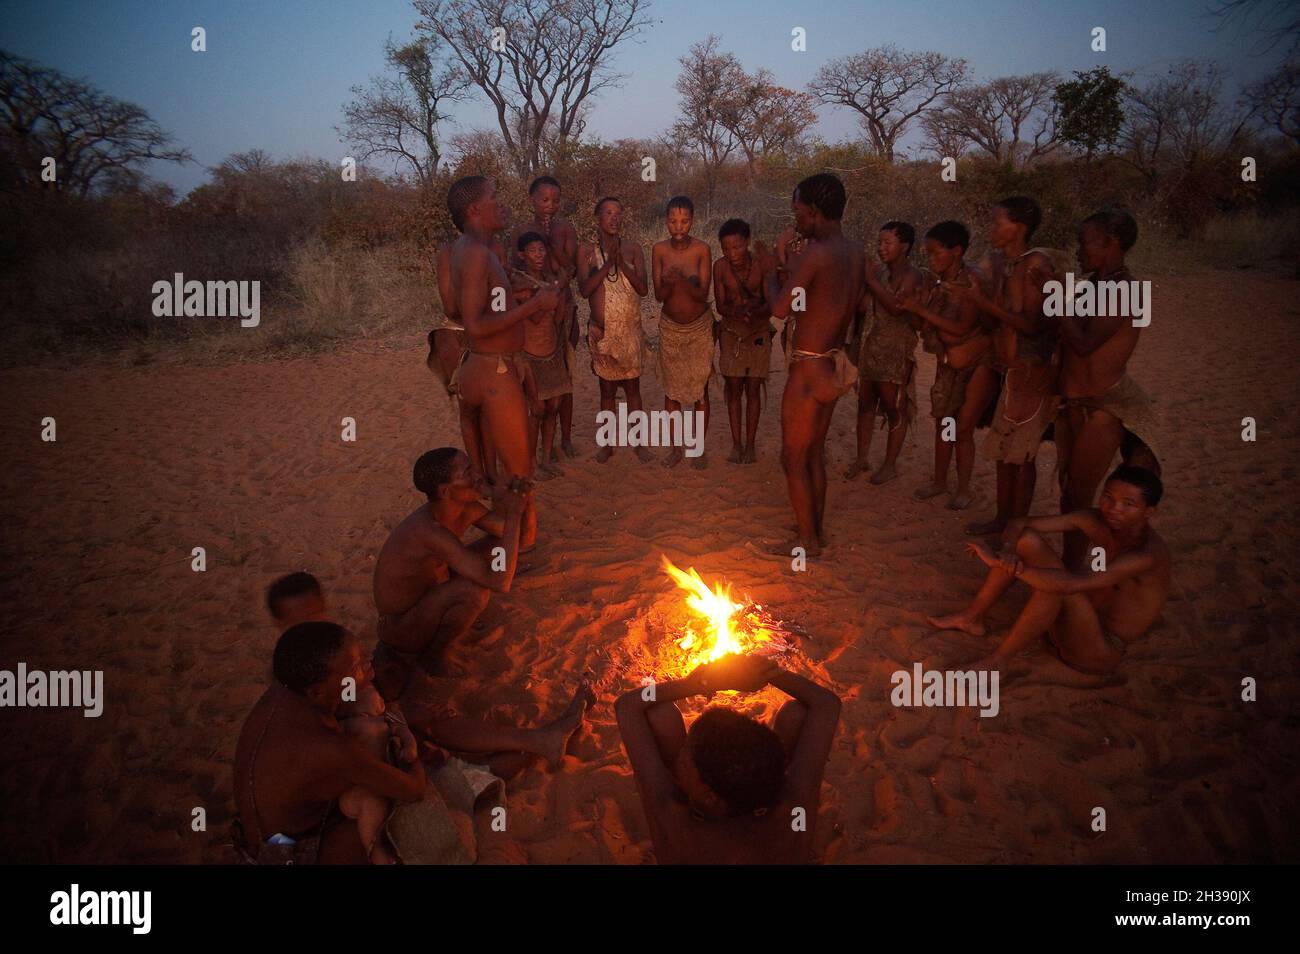 Bushman People Around The Campfire Performing A Traditional Dance At Dusk Grashoek Namibia